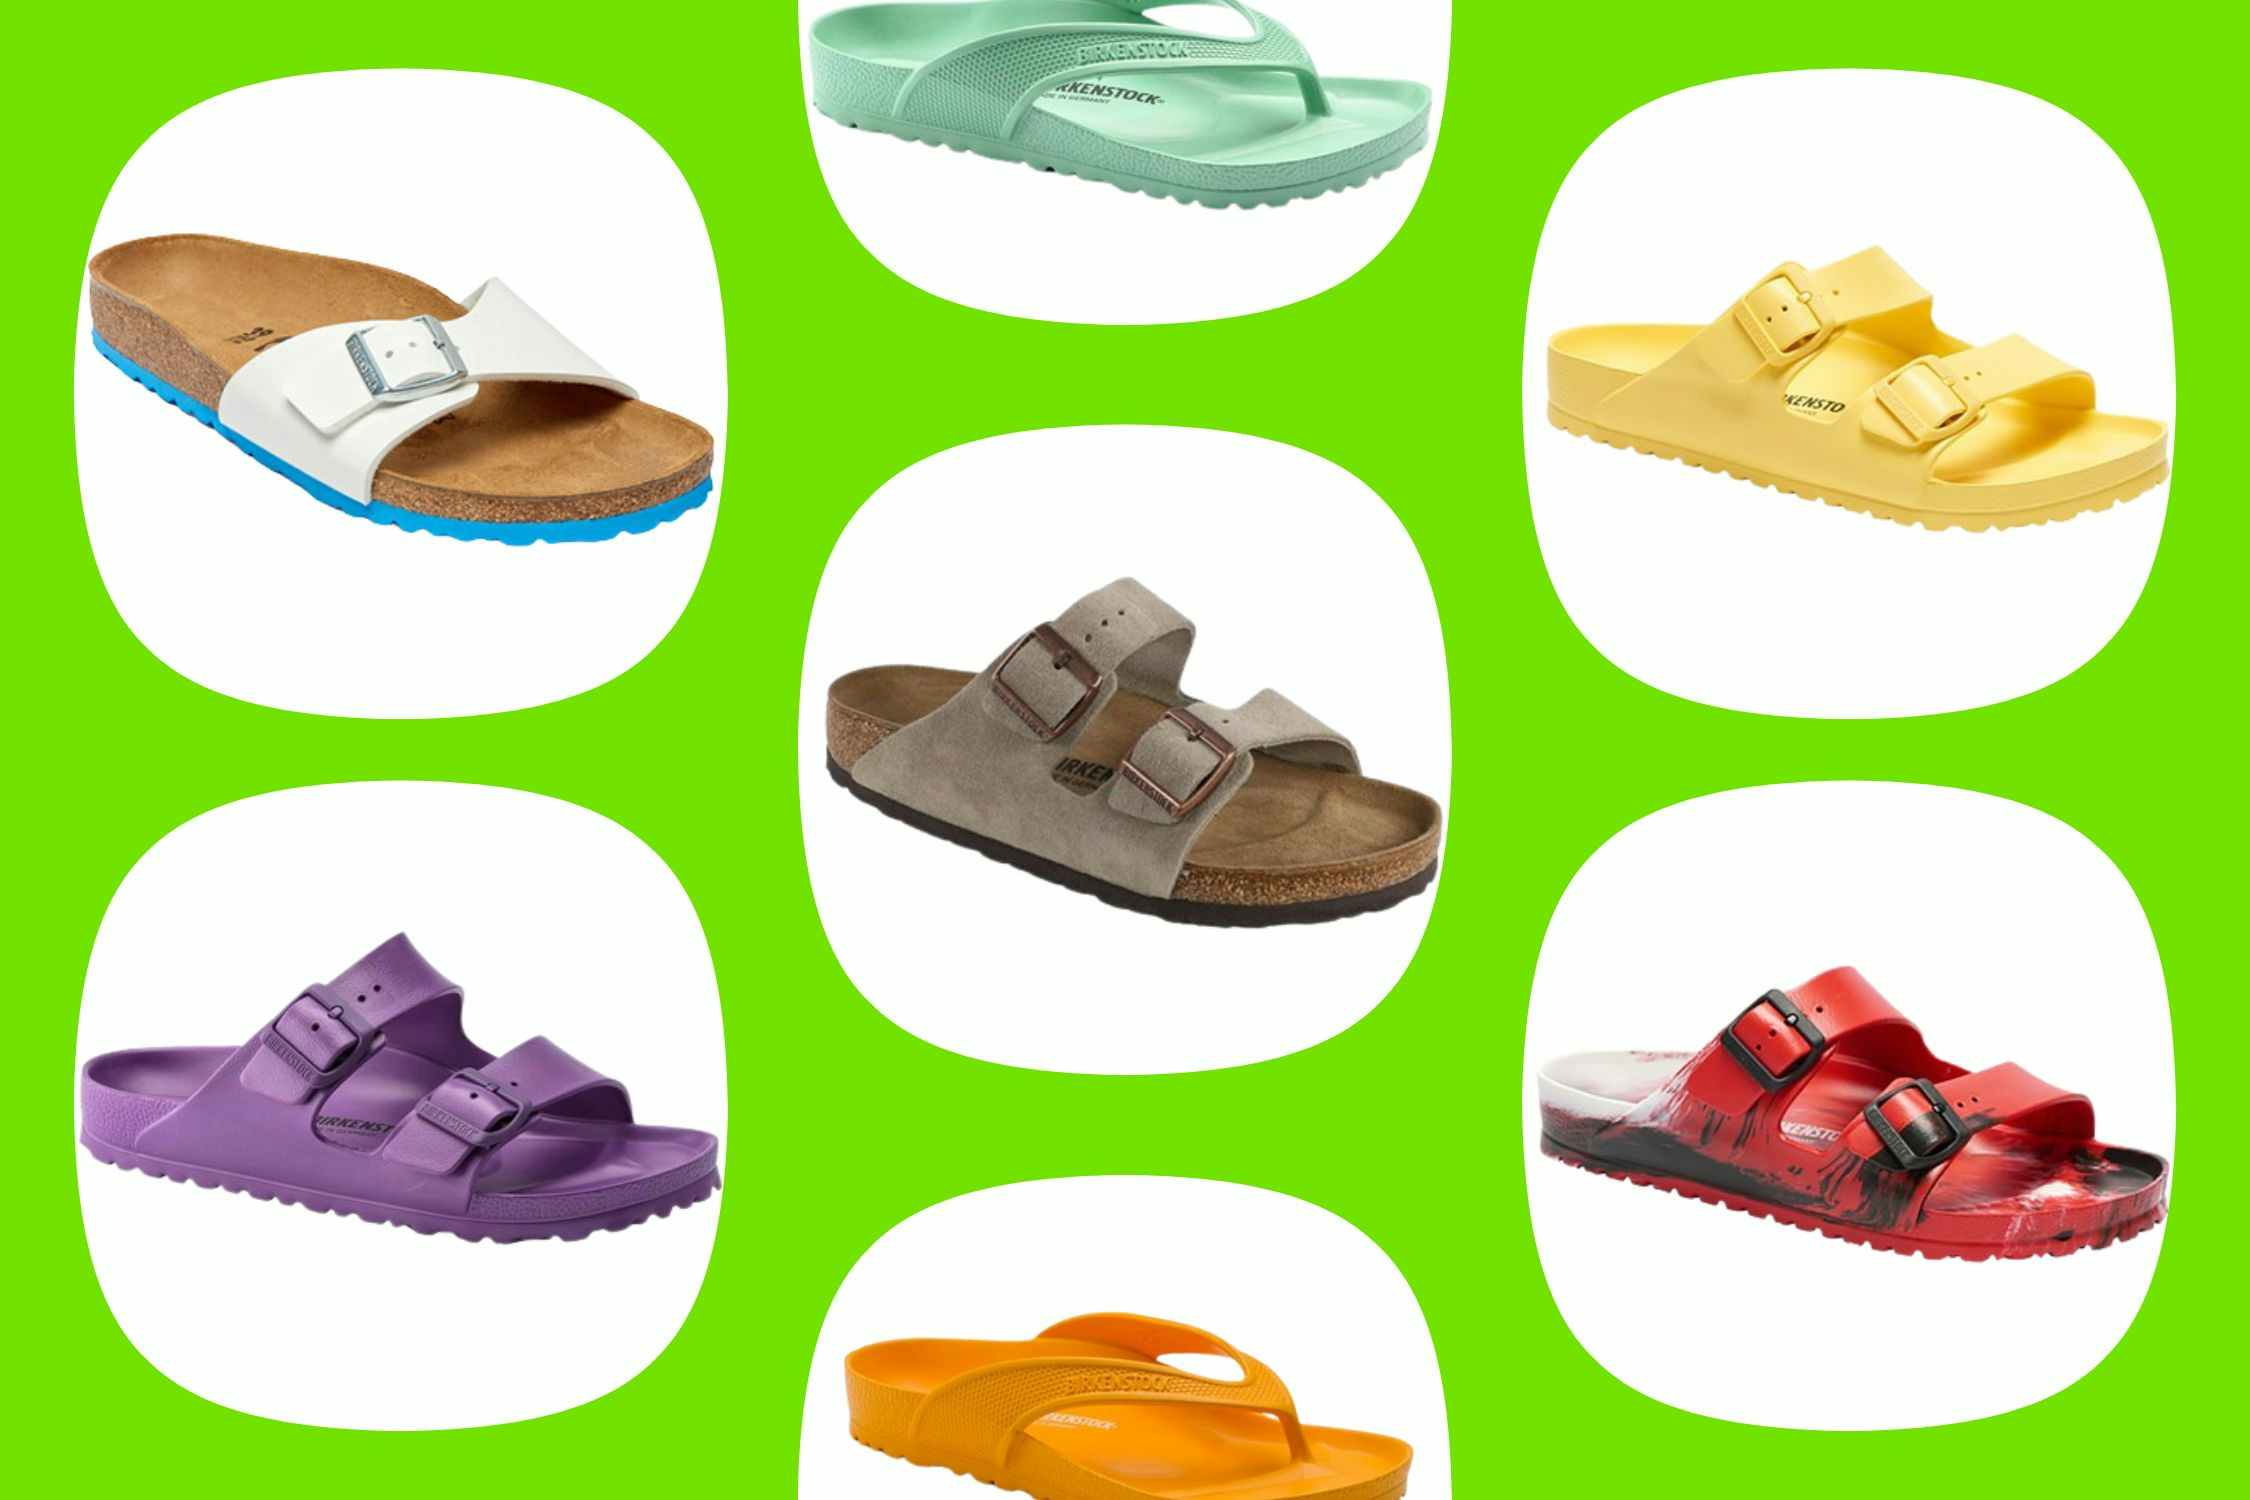 Birkenstock Sale: Prices Start at $30 Shipped With Amazon Prime